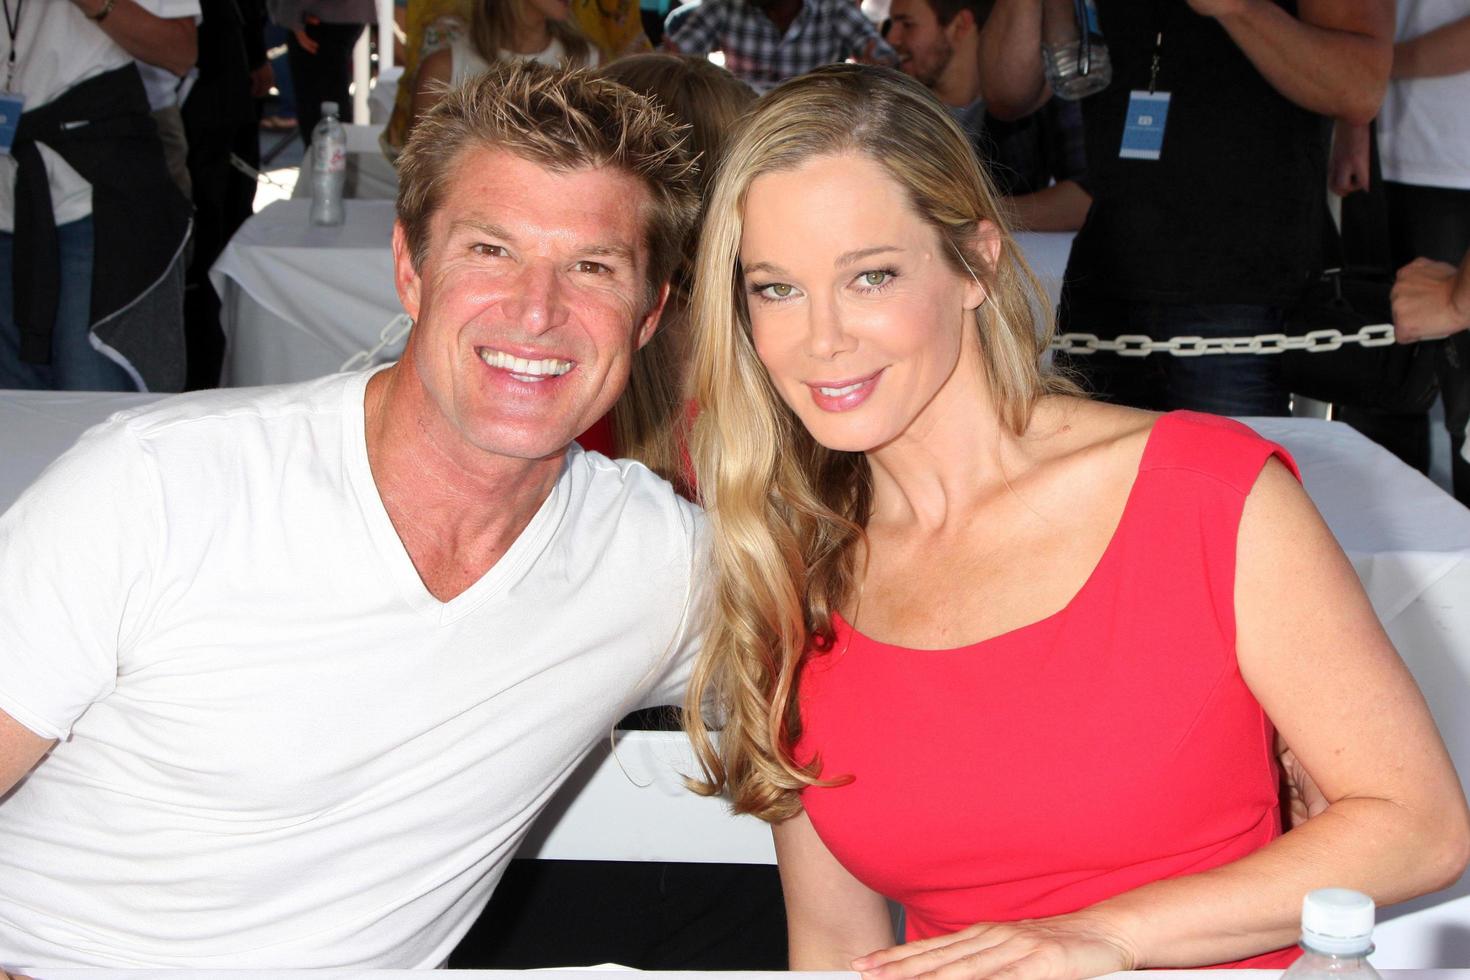 LOS ANGELES, AUG 23 - Winsor Harmon, Jennifer Gareis at the Bold and Beautiful Fan Meet and Greet at the Farmers Market on August 23, 2013 in Los Angeles, CA photo